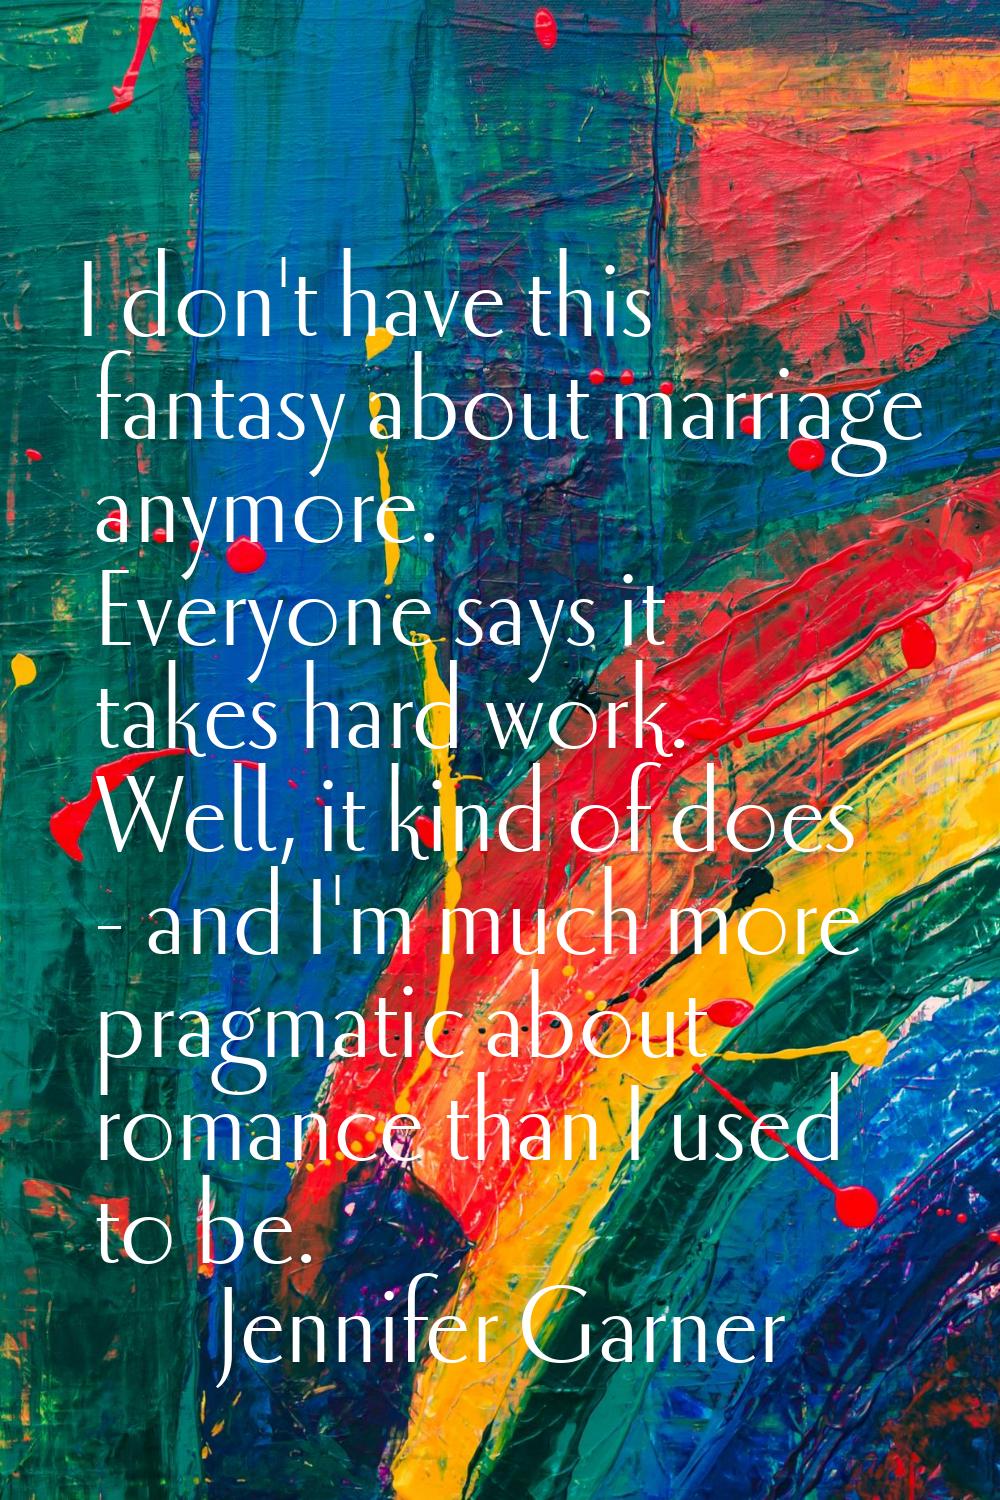 I don't have this fantasy about marriage anymore. Everyone says it takes hard work. Well, it kind o